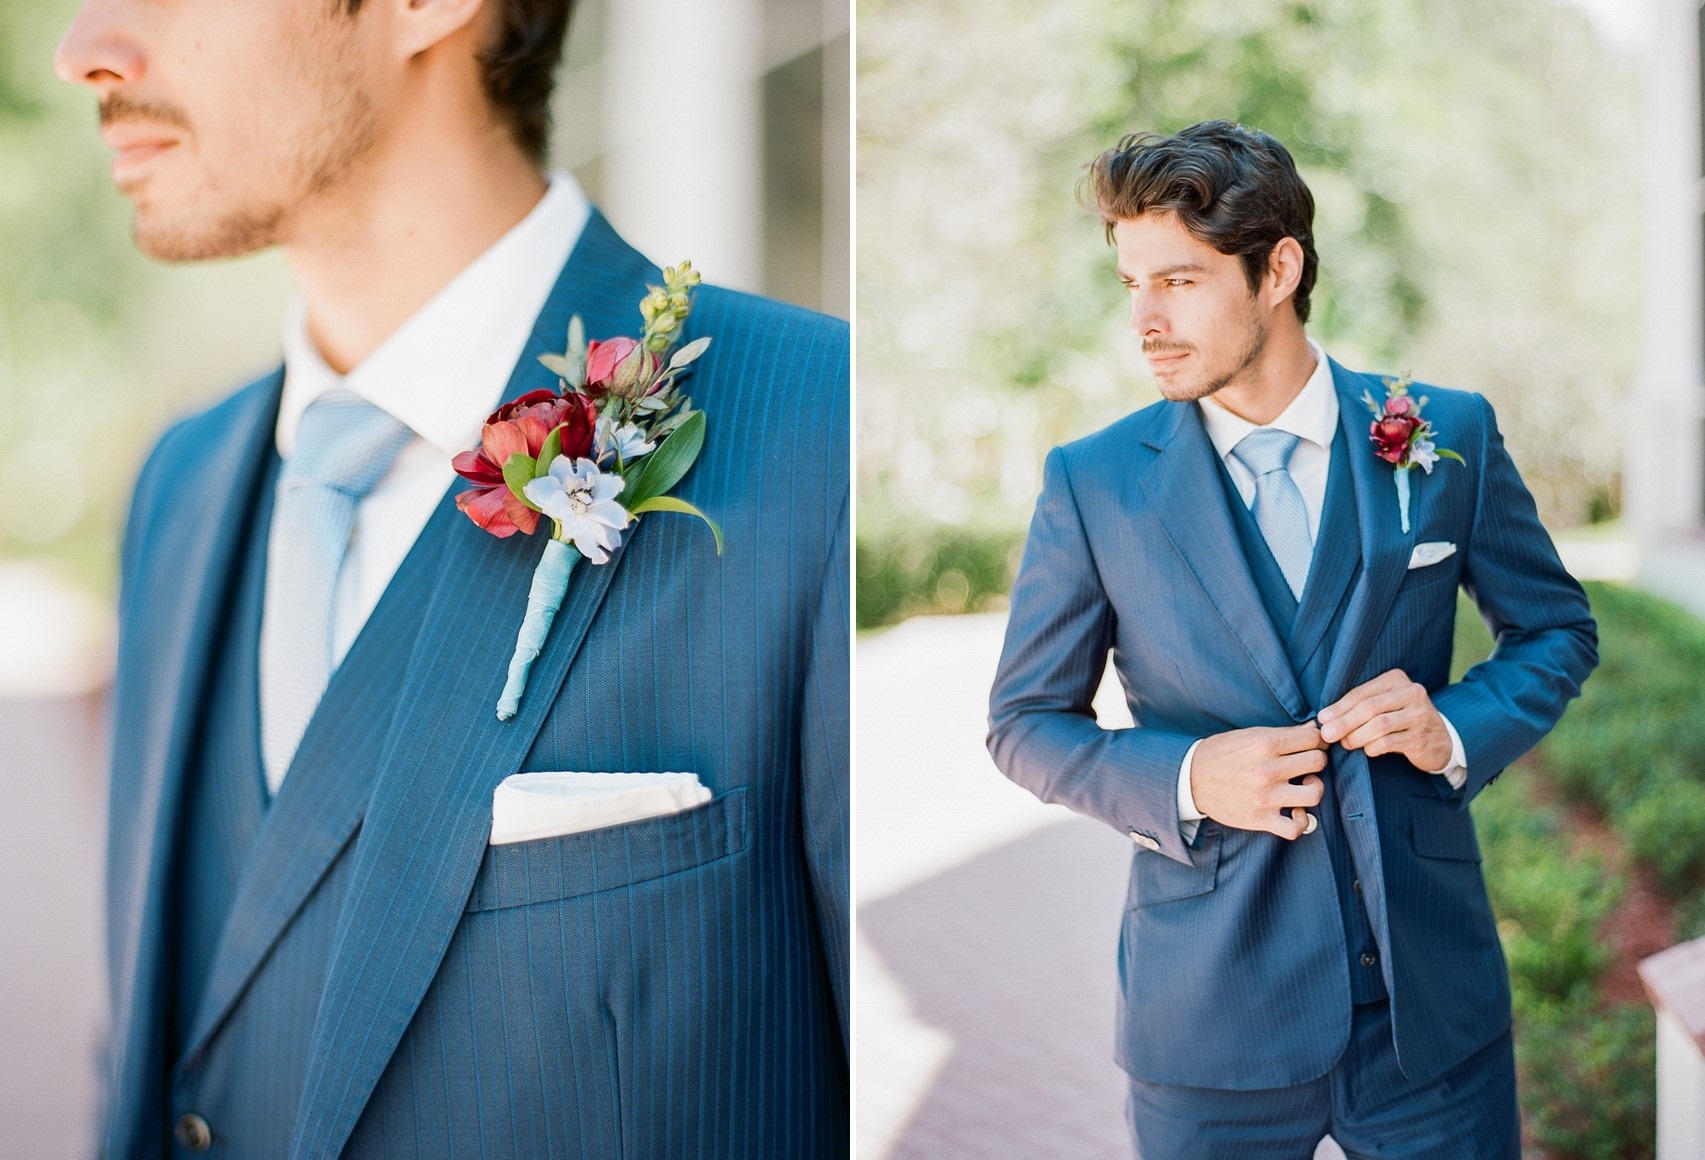 Dashing Groom in a Blue Suit